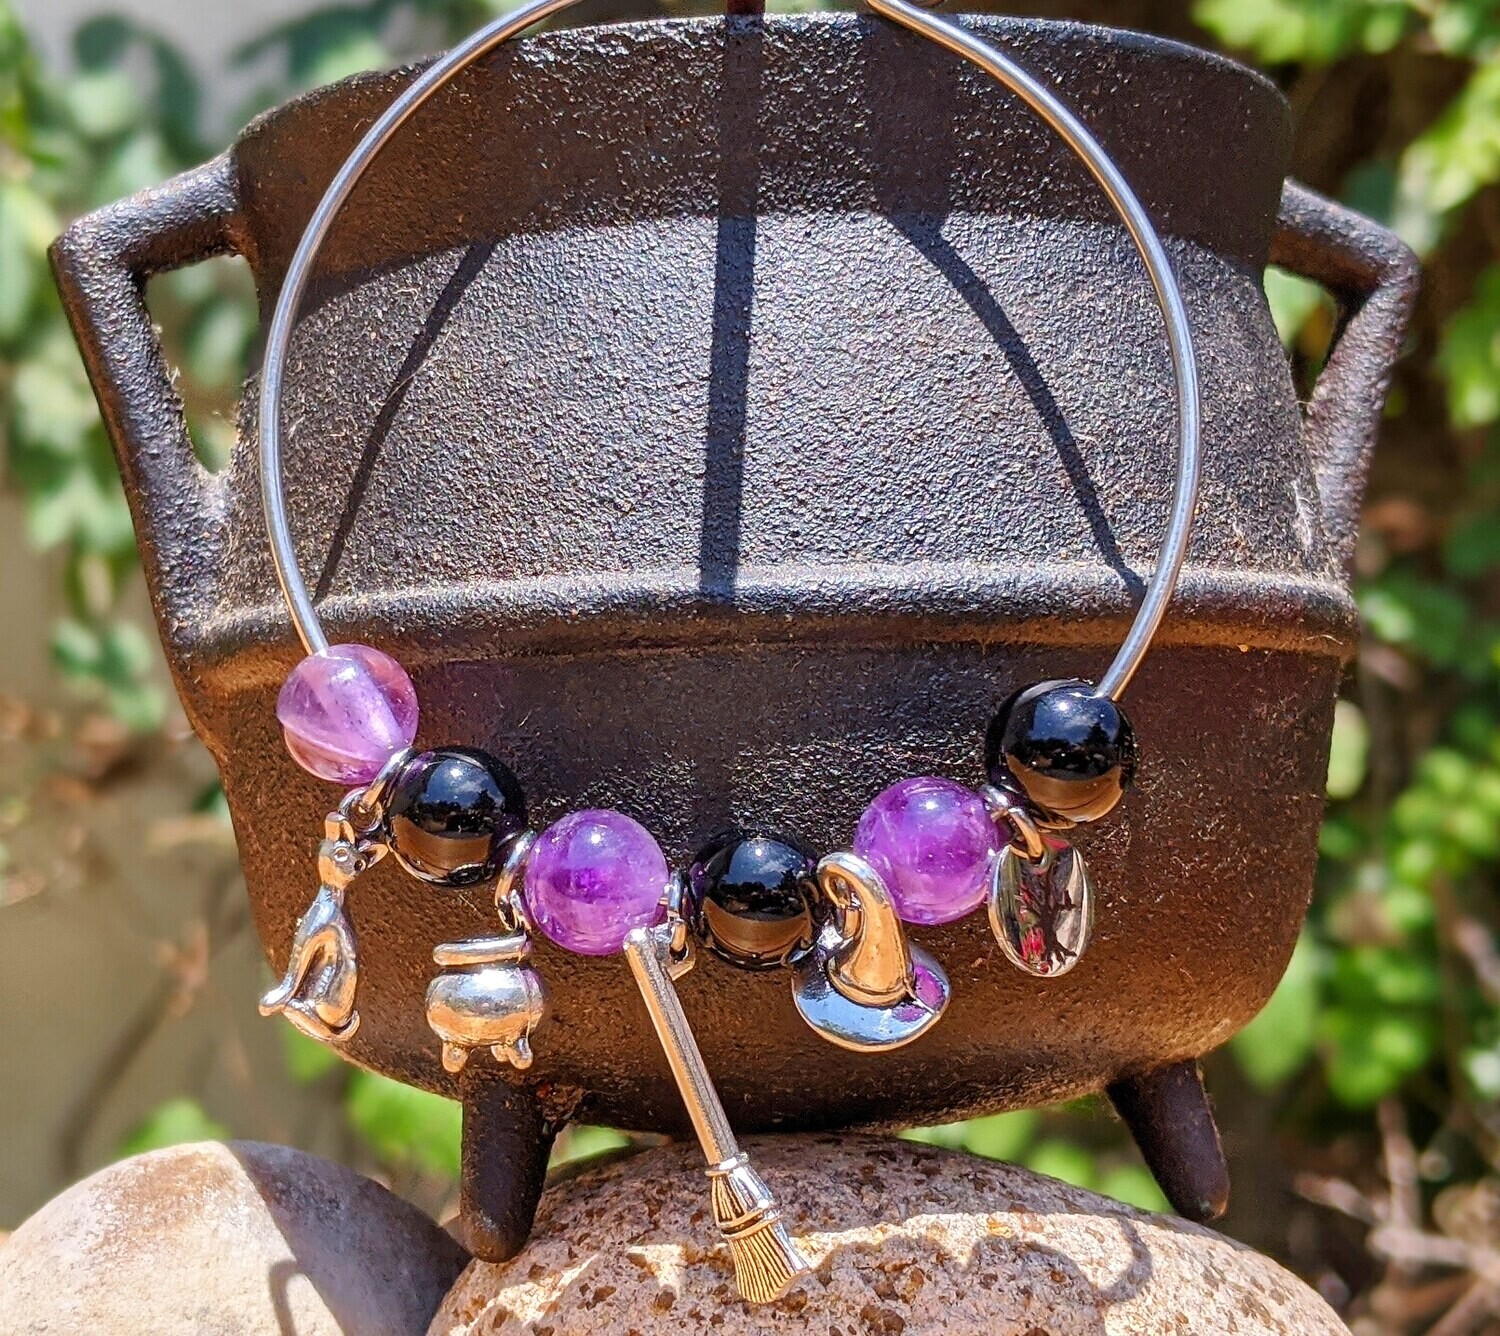 Spellbound Stainless Steel Witch Charm Bracelet with Purple Amethyst and Black Agate Beads